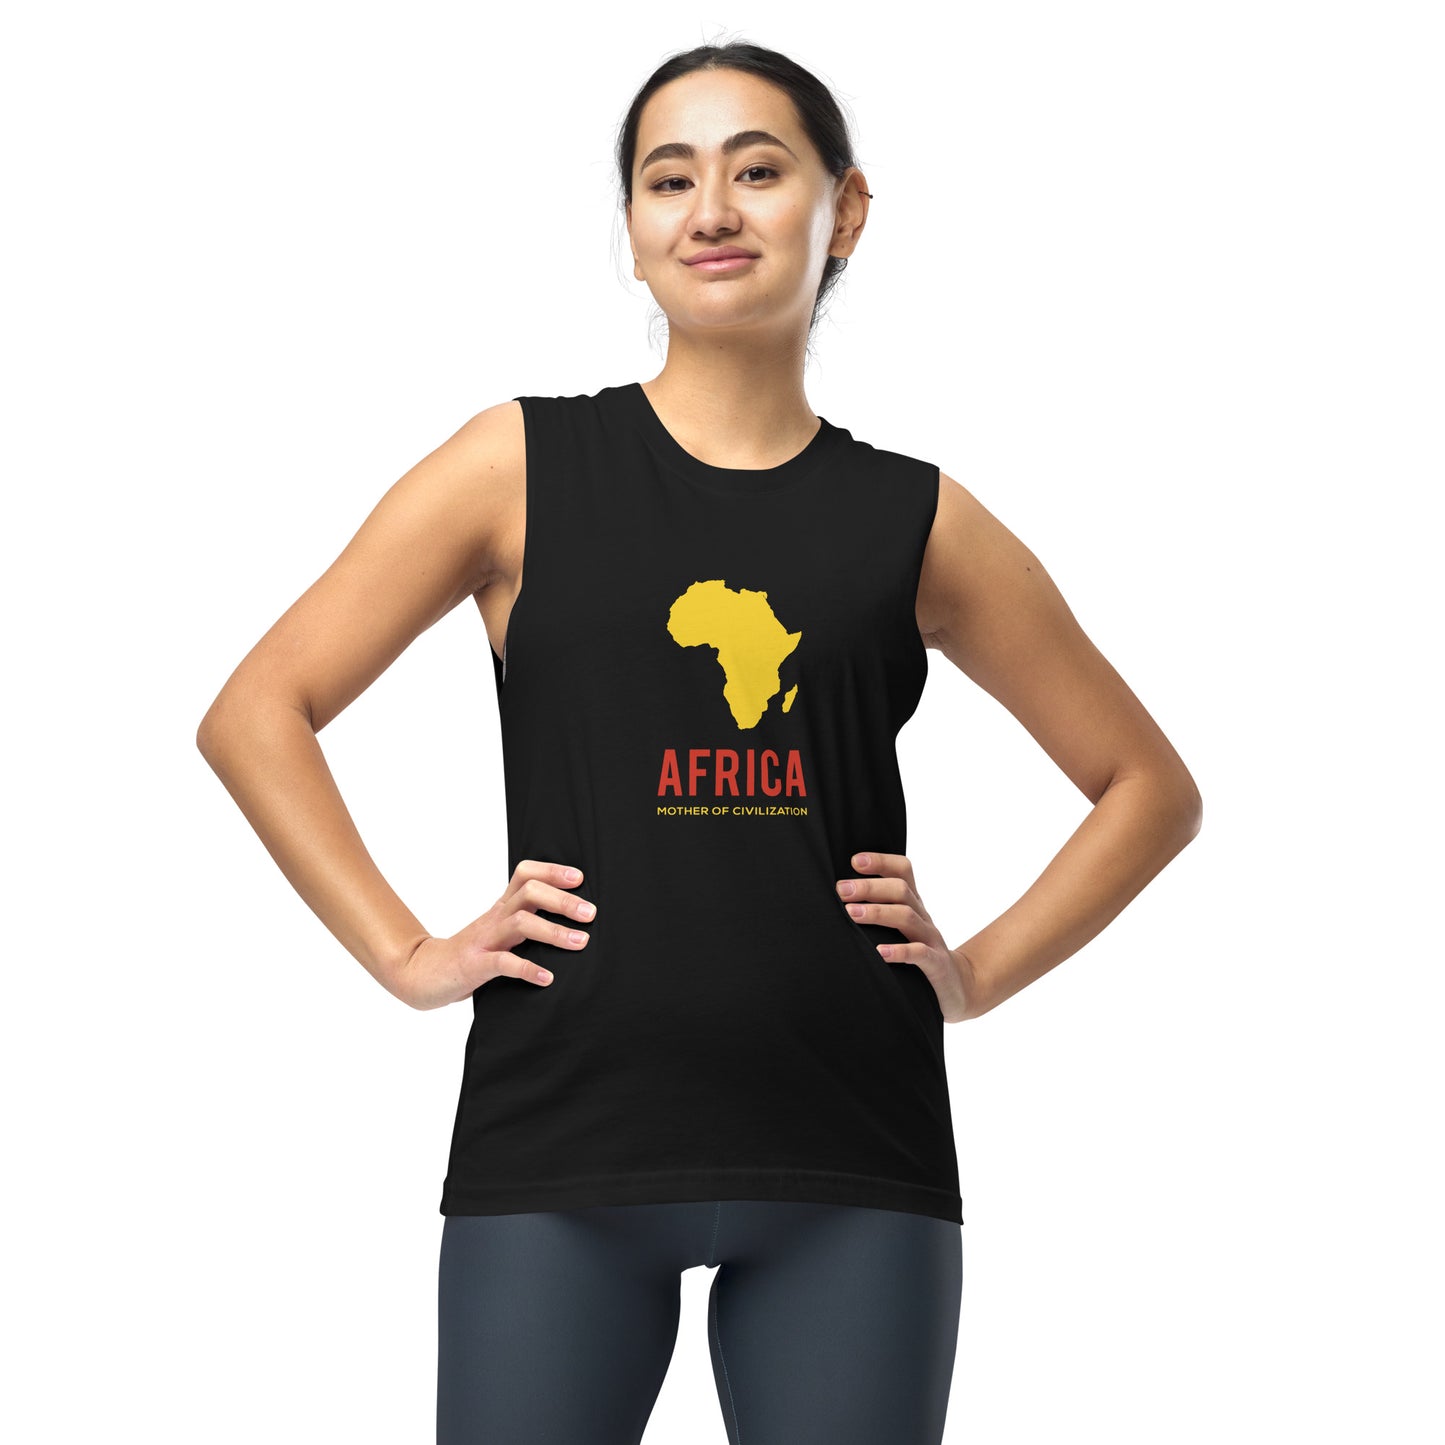 AFRICA - MOTHER OF CIVILIZATION Muscle Shirt